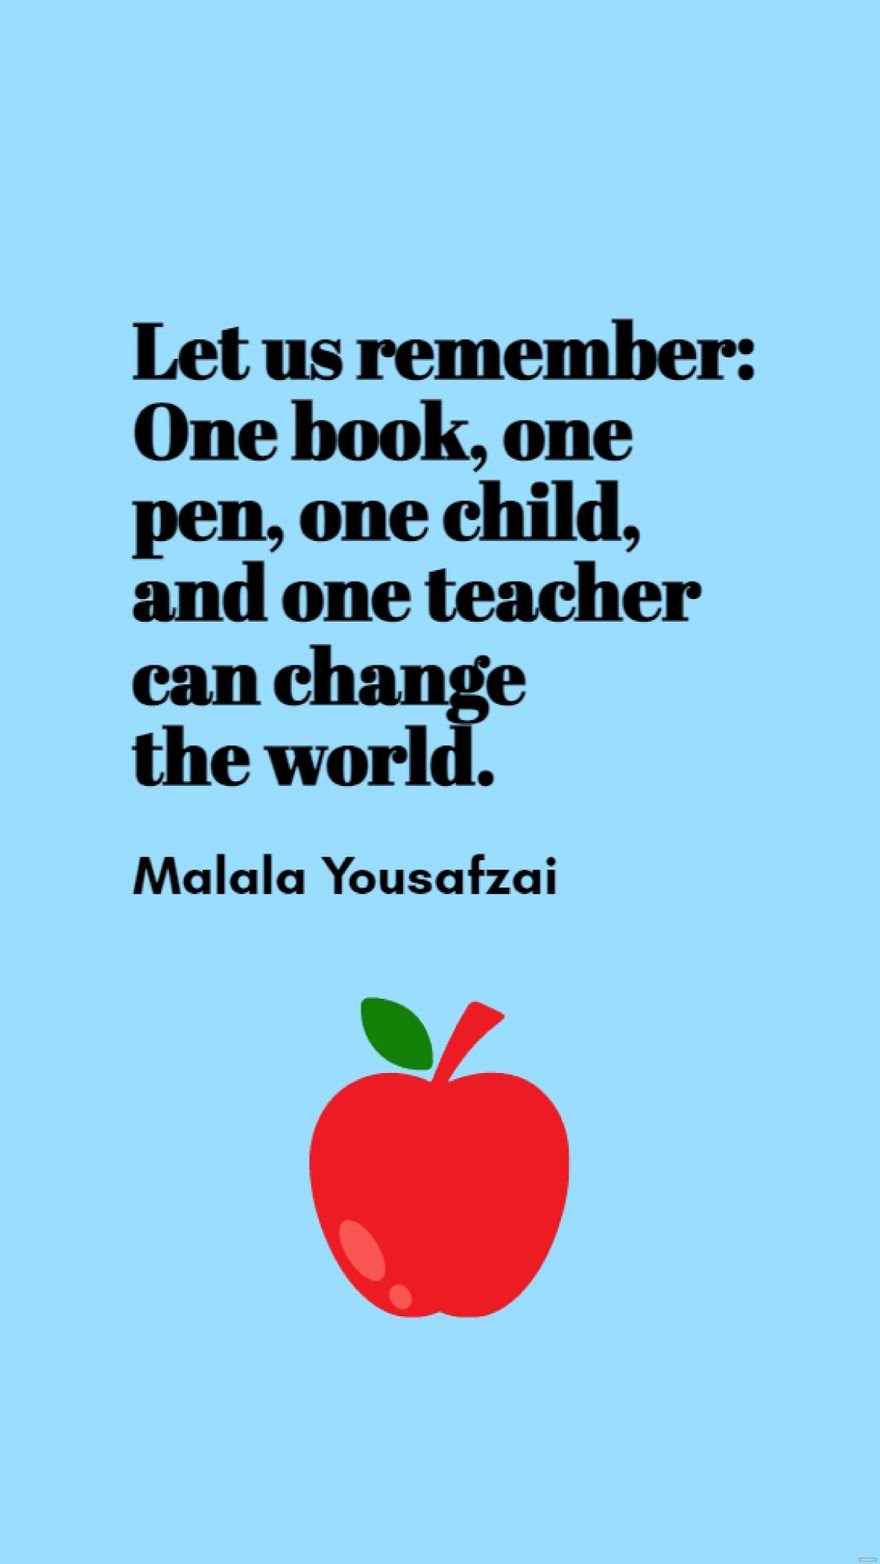 Malala Yousafzai - Let us remember: One book, one pen, one child, and one teacher can change the world.